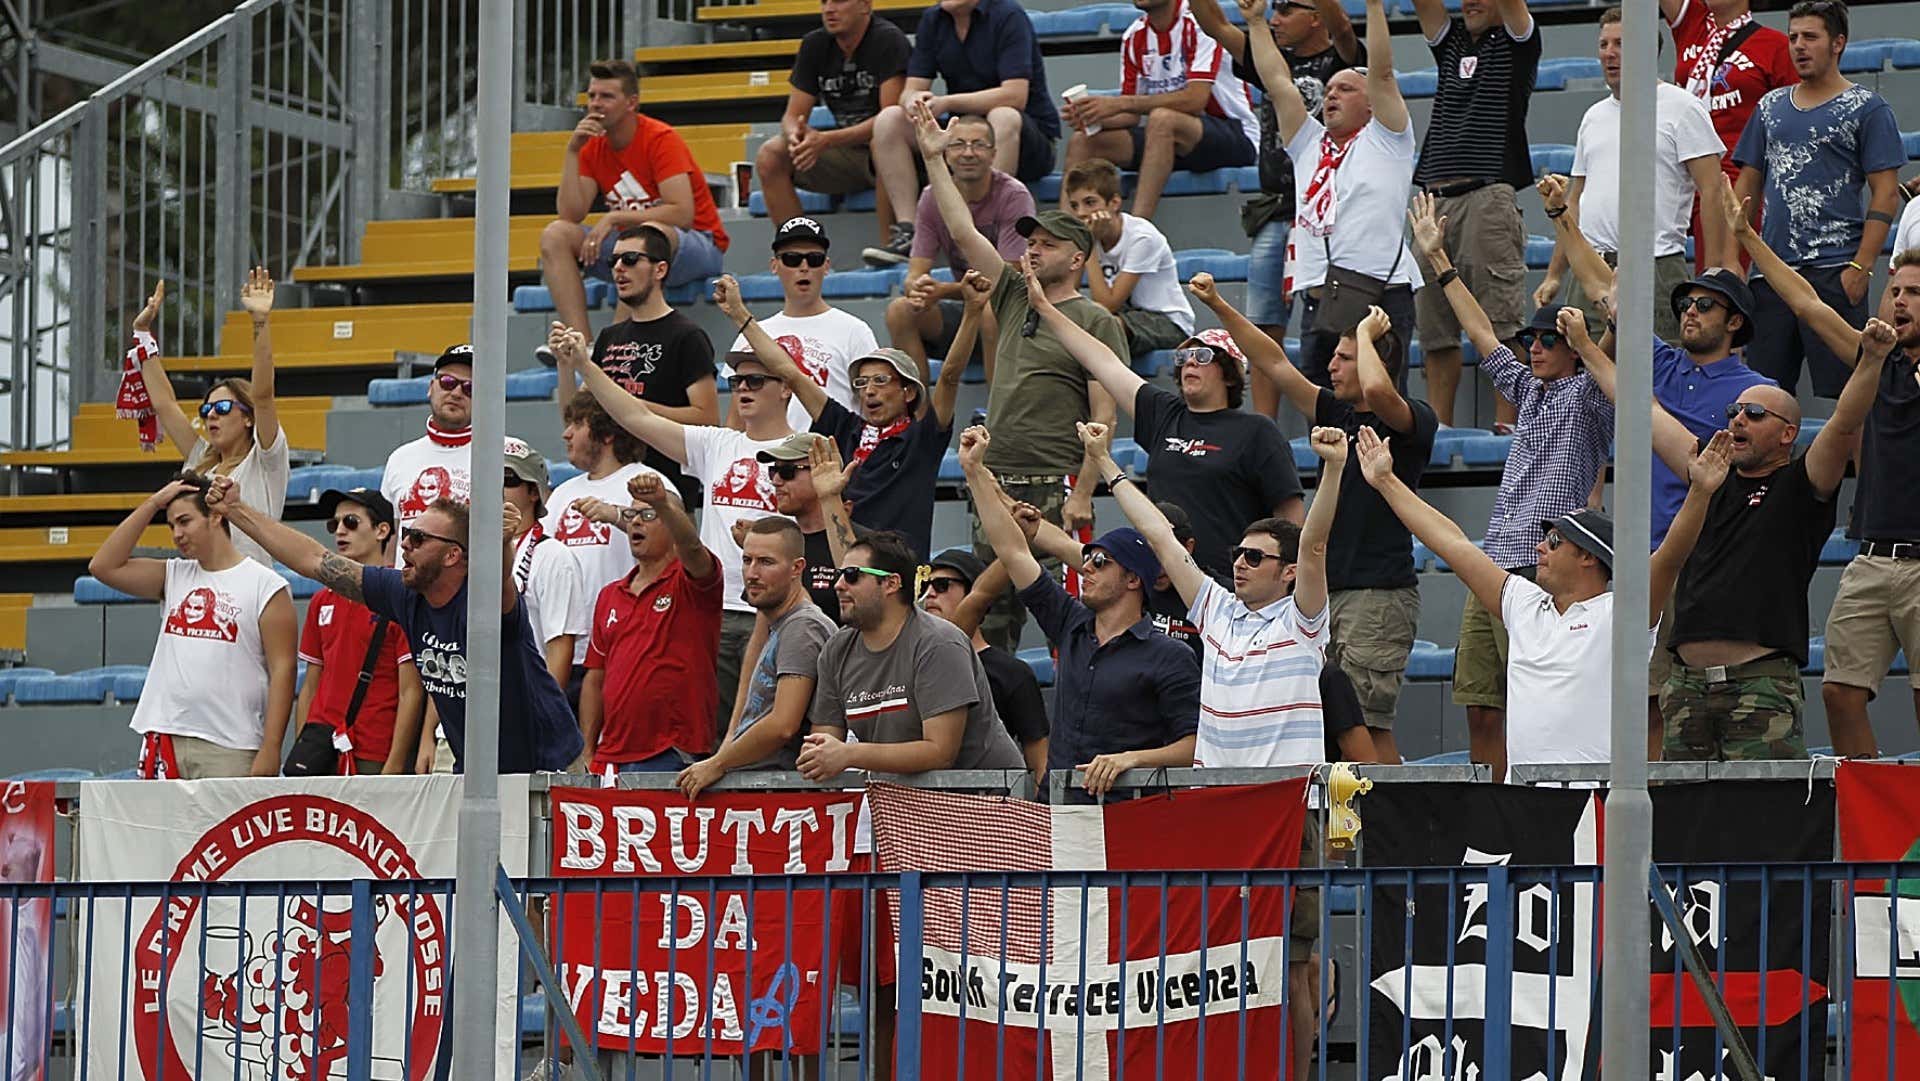 Vicenza fans